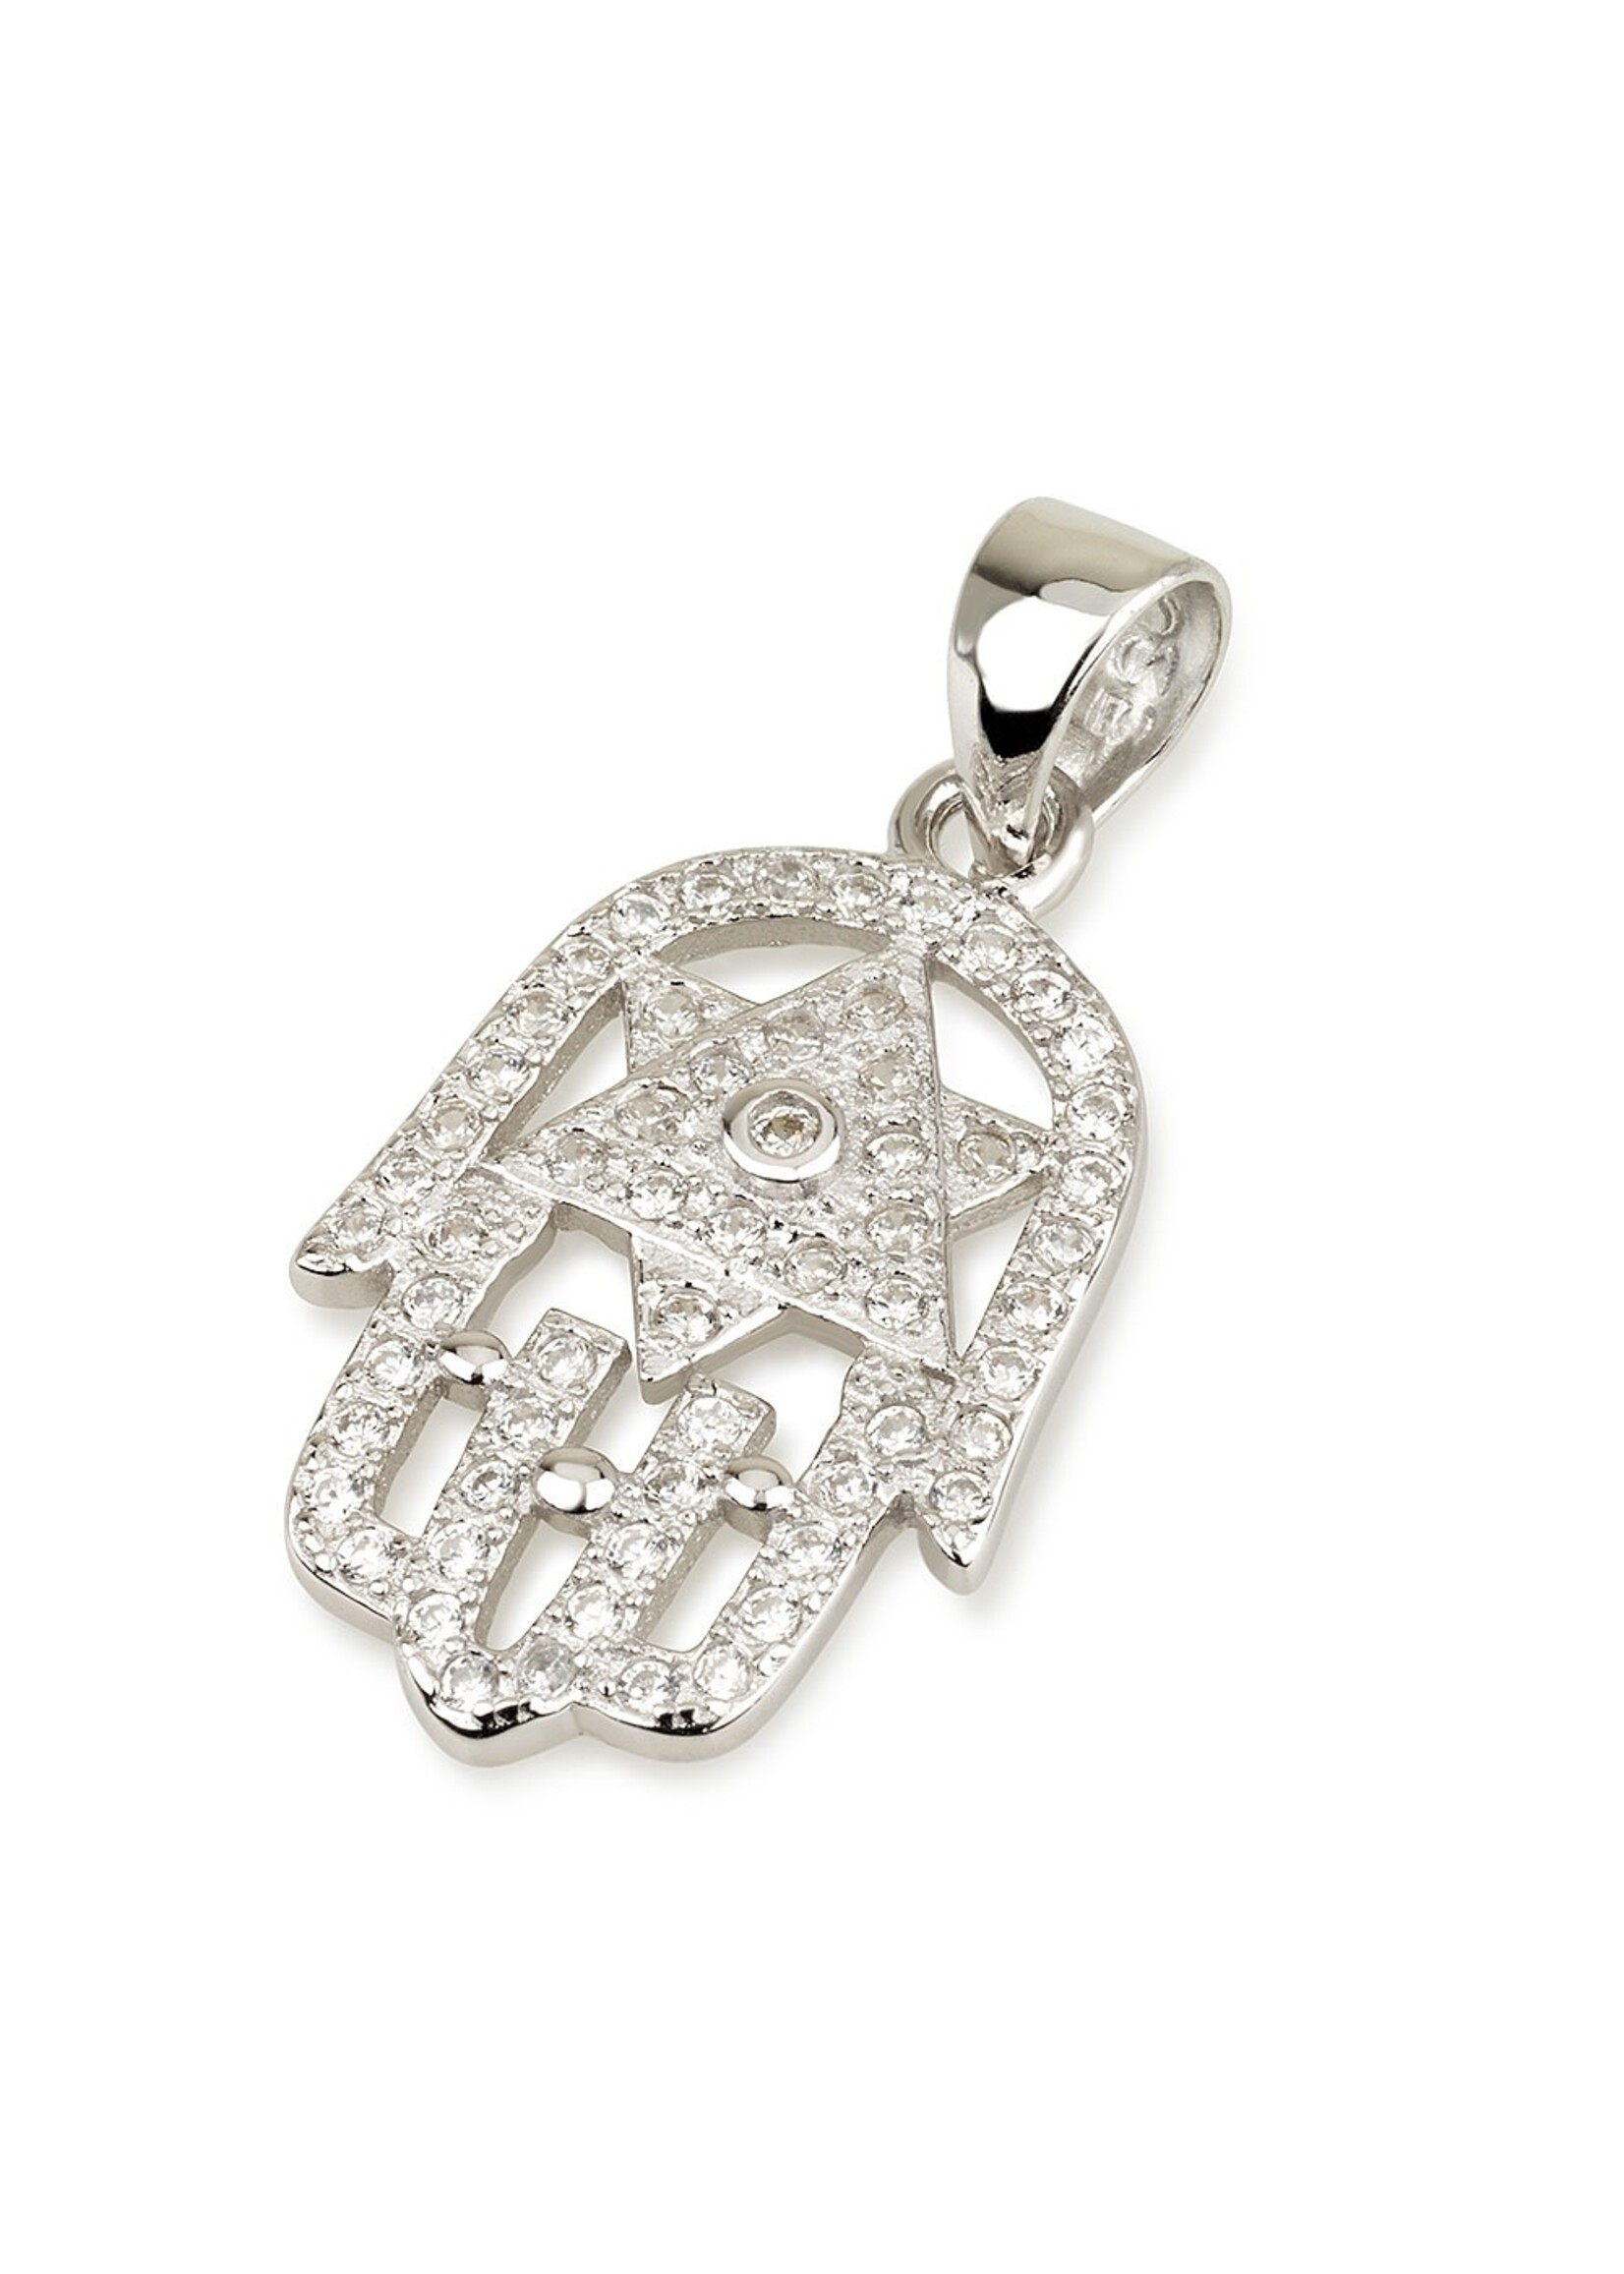 NECKLACE STAR OF DAVID INSIDE HAMSA COVERED IN CRYSTALS